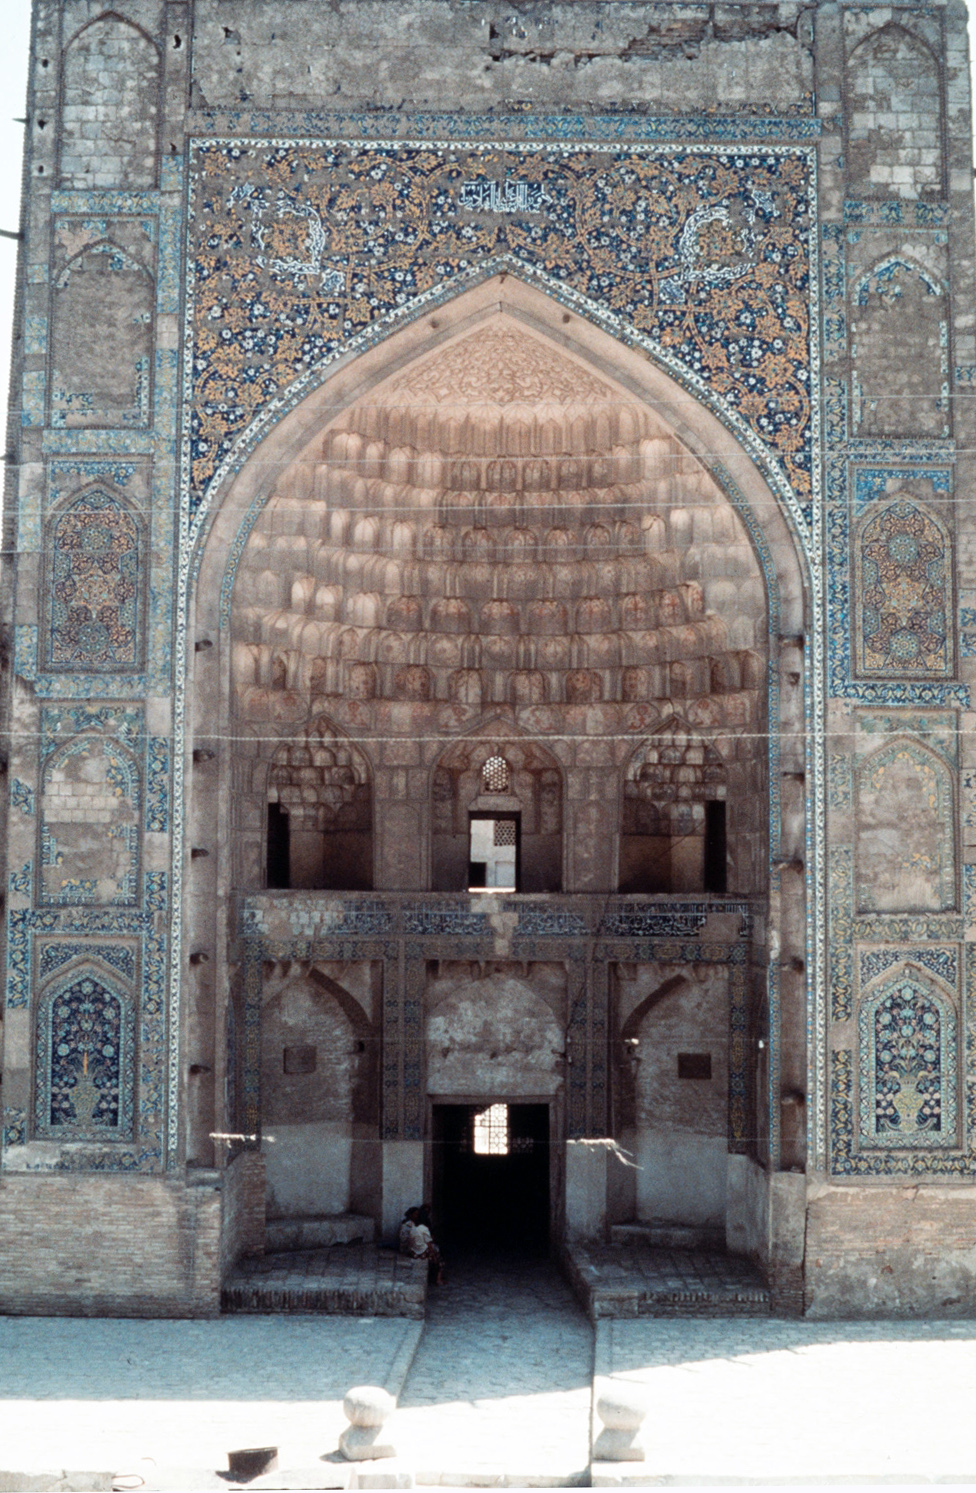 View of the entrance pishtaq, from the Ulugh Beg Madrasa